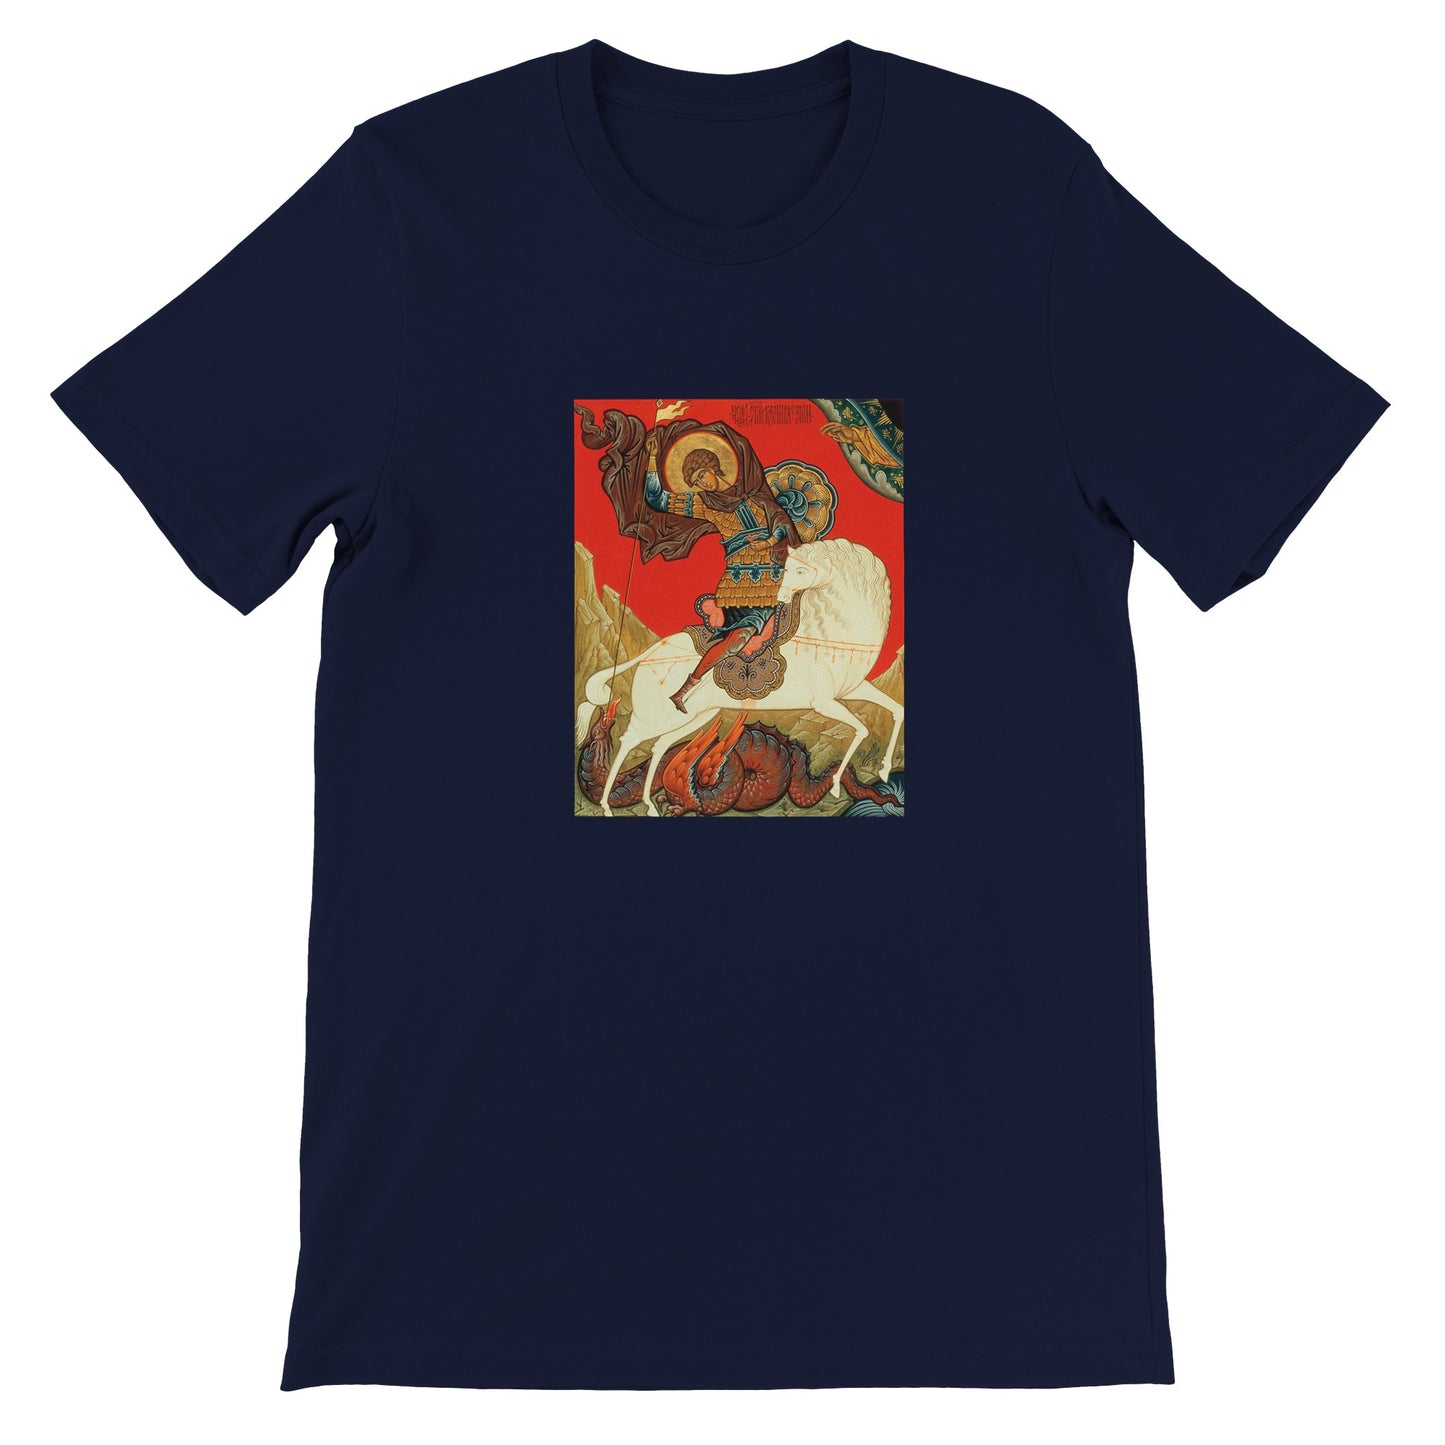 a t - shirt with a painting of a man riding a horse